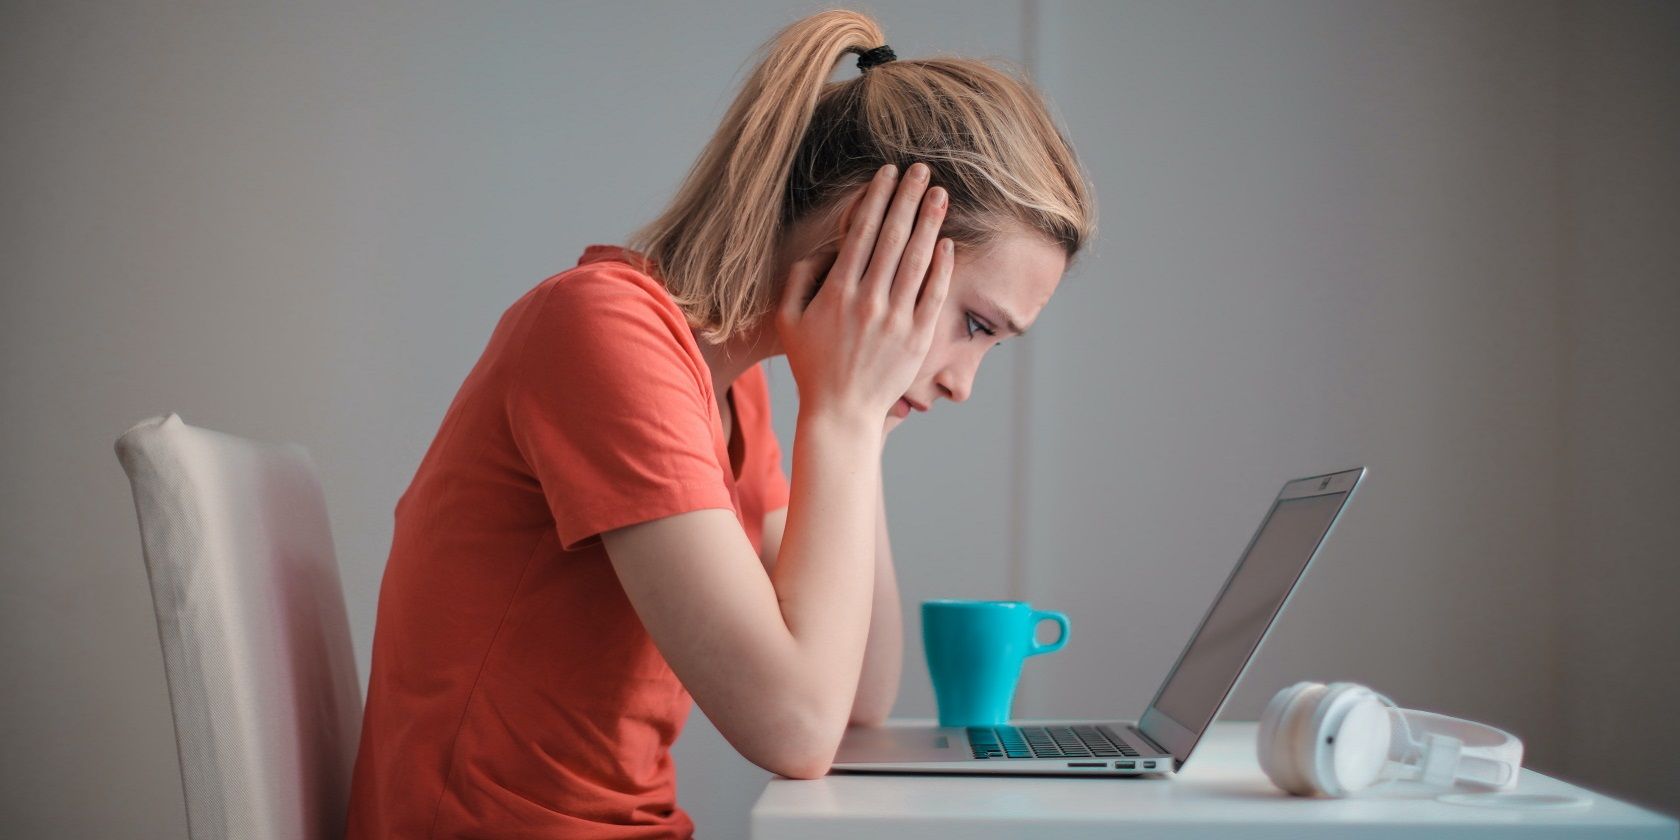 Frustrated woman in front a PC